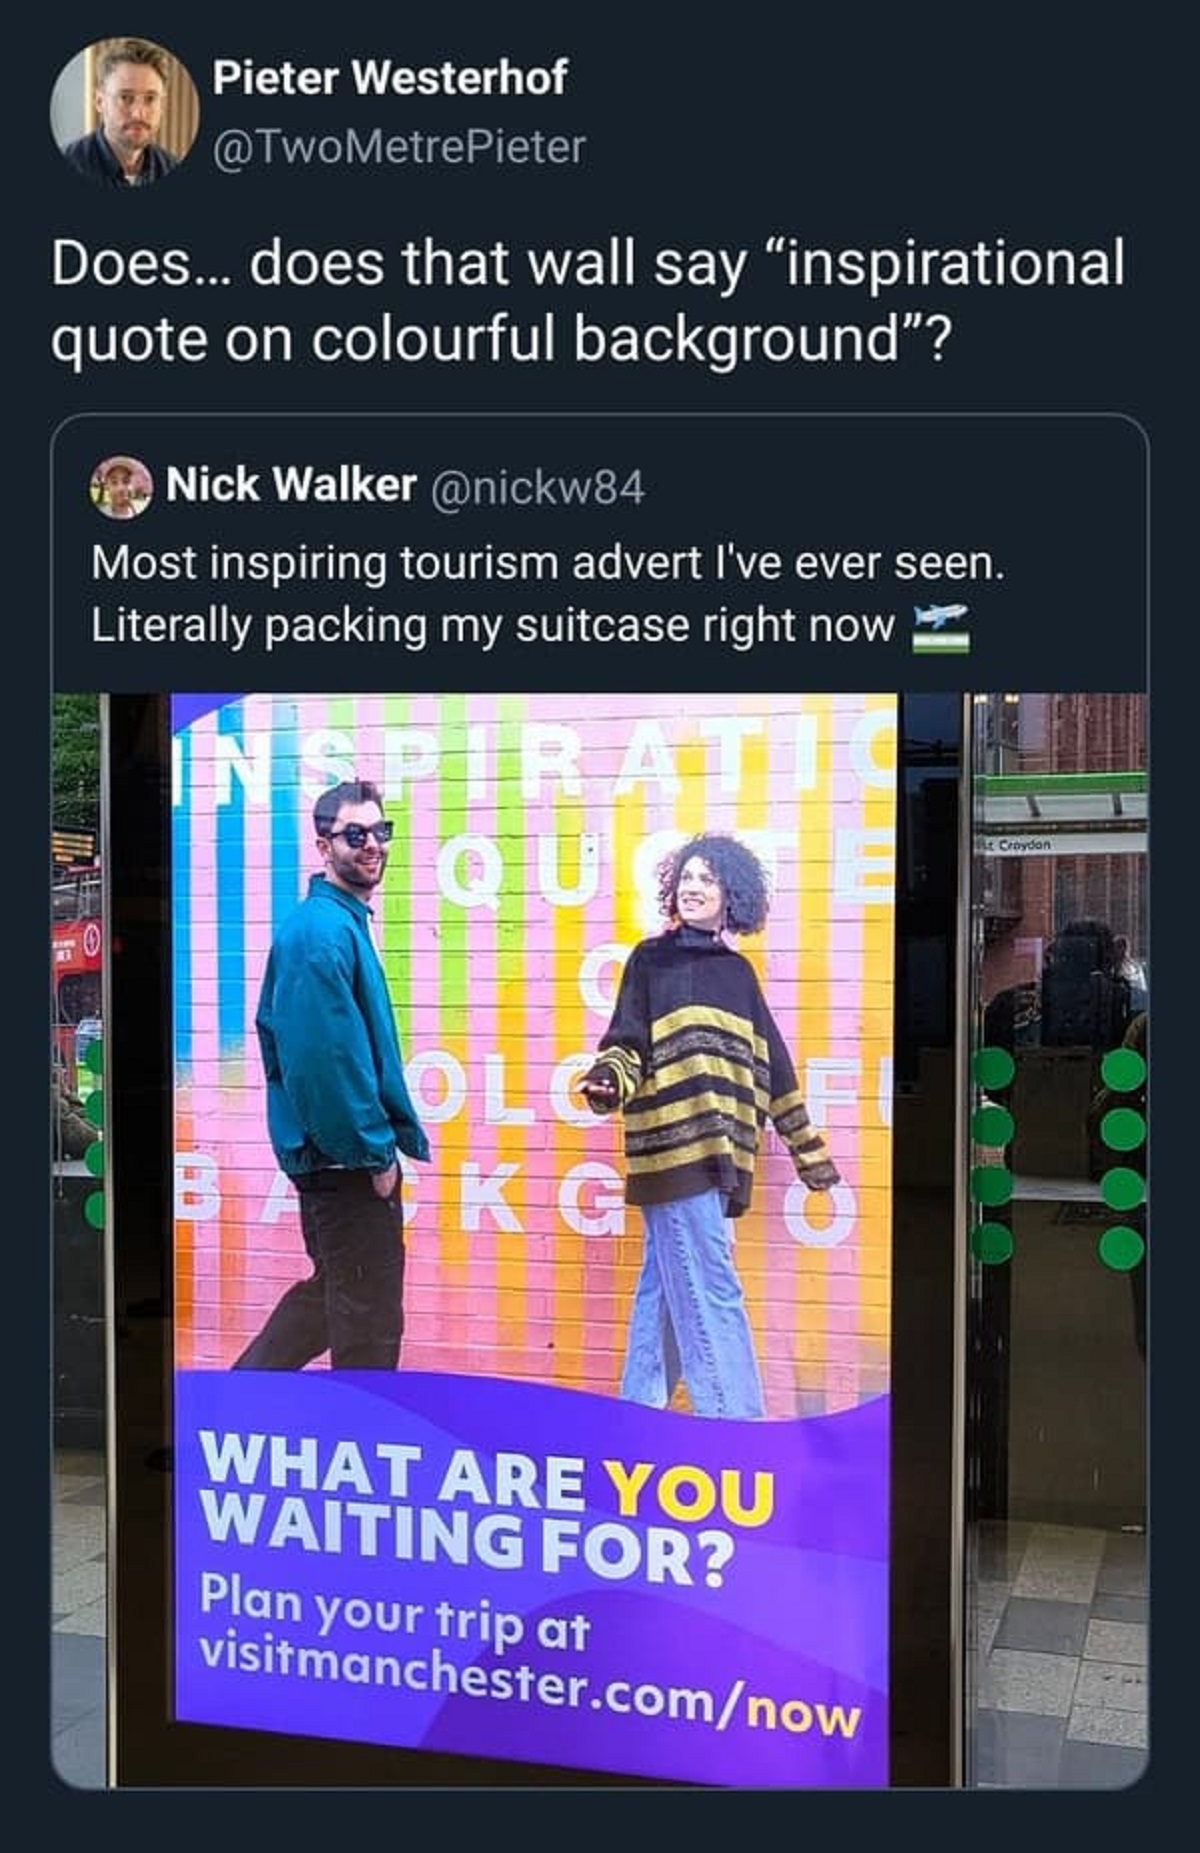 banner - Pieter Westerhof Does... does that wall say "inspirational quote on colourful background"? Nick Walker Most inspiring tourism advert I've ever seen. Literally packing my suitcase right now Qu Olo Kg What Are You Waiting For? Plan your trip at…